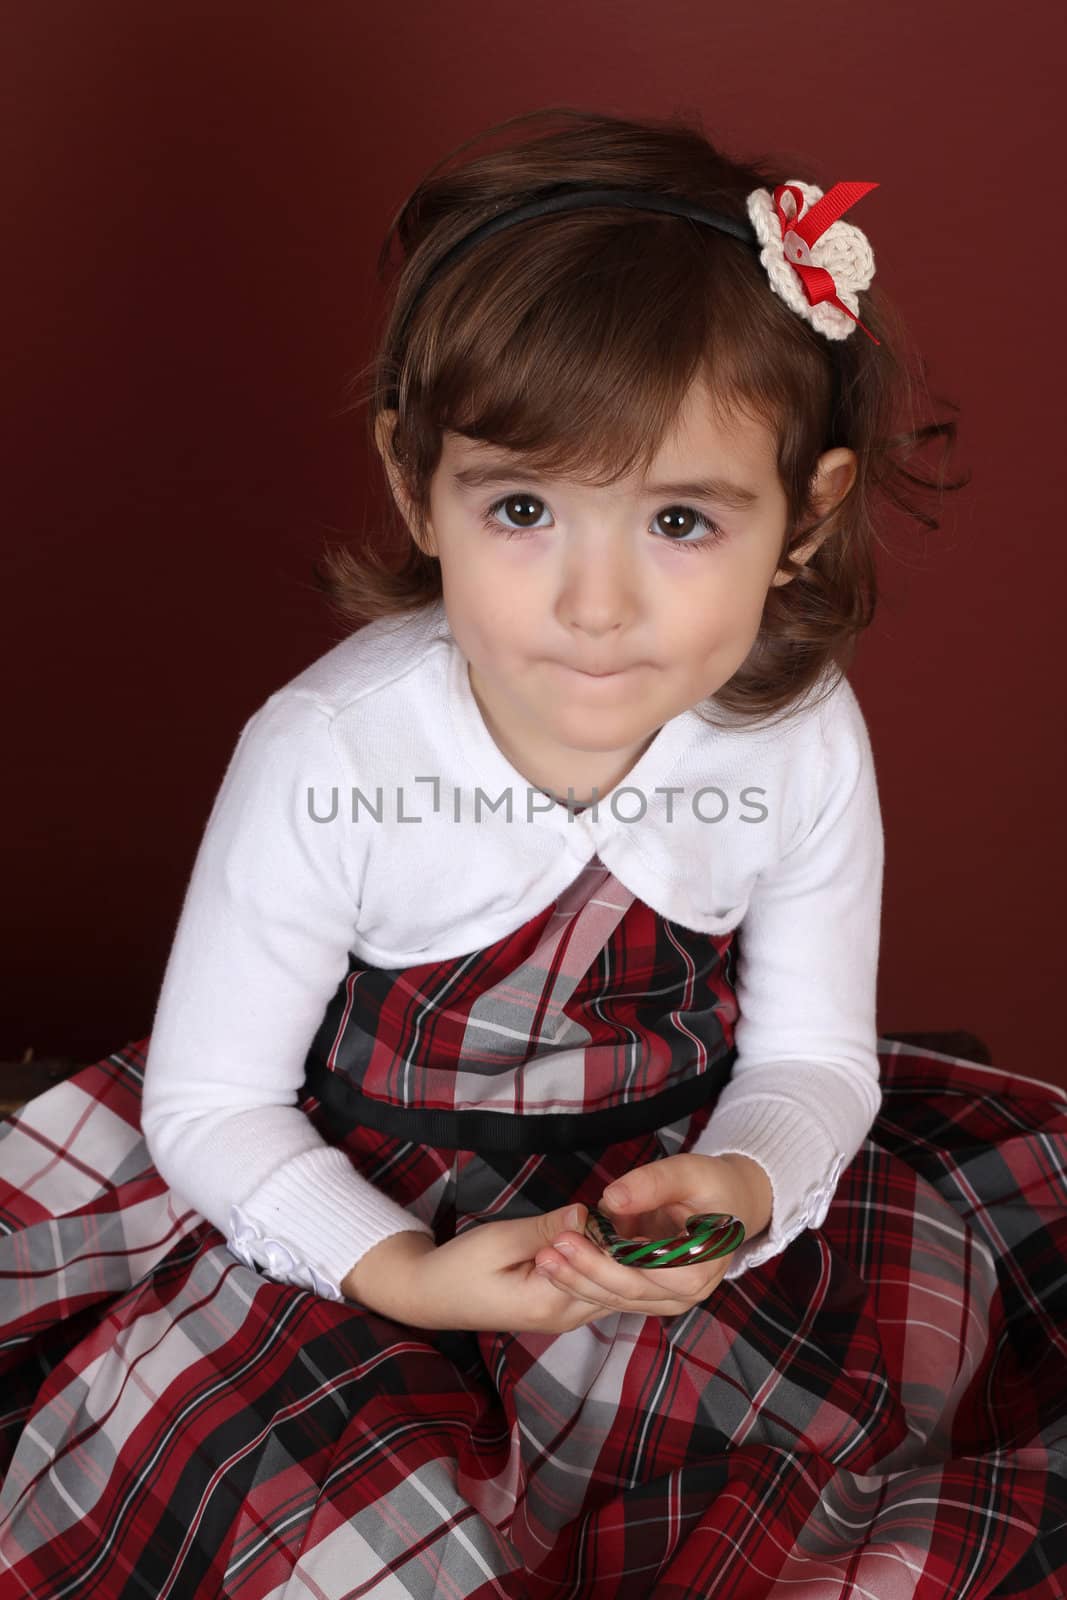 Cute little brunette toddler with serious expression